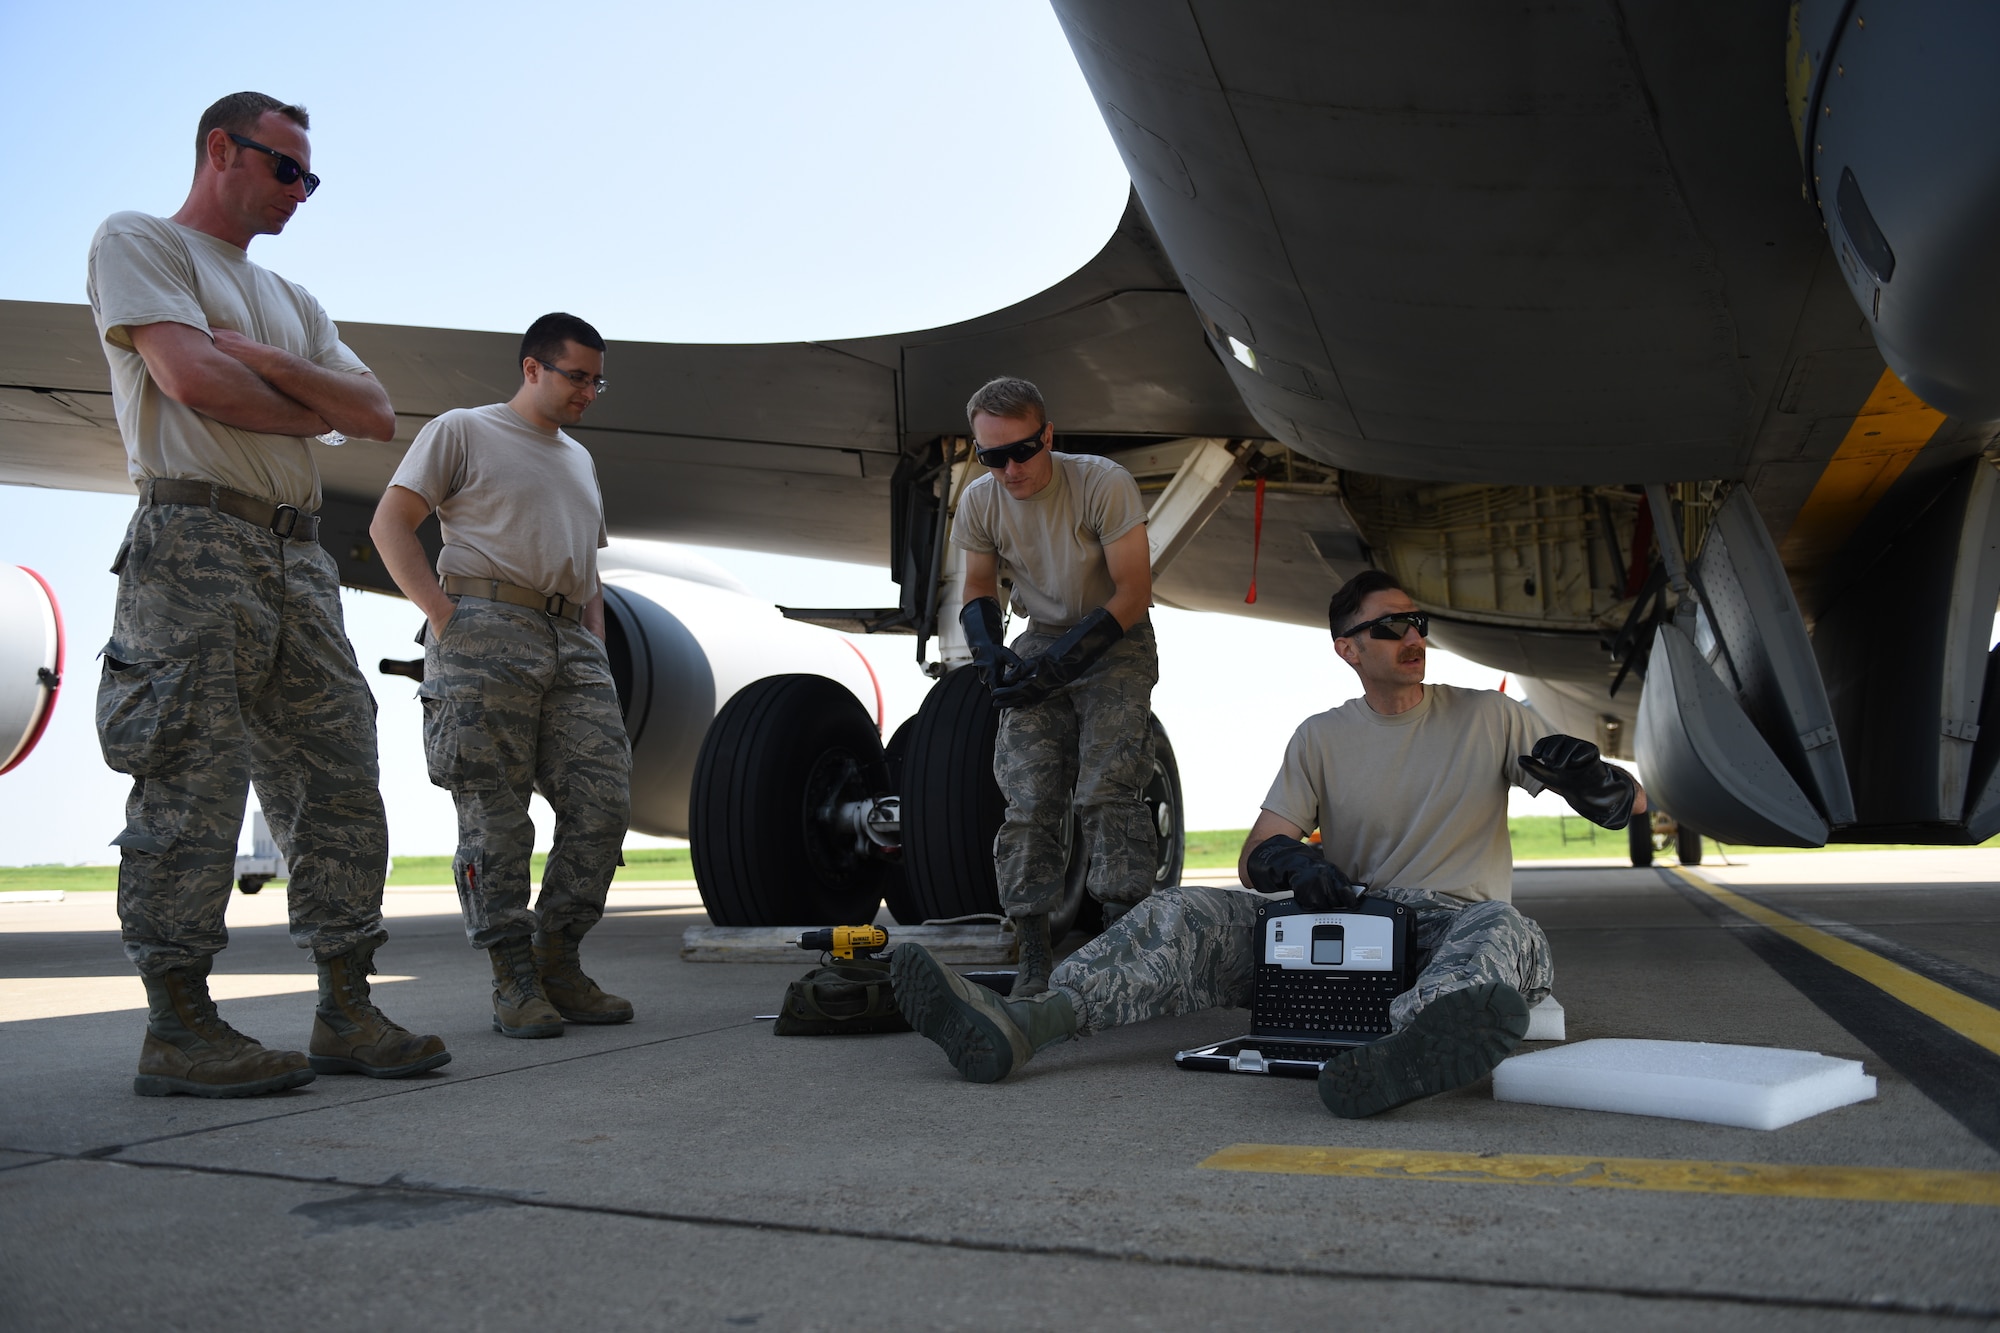 Pennsylvania Air National Guardsmen Staff Sgt. Patrick Olish, Senior Airman Nick Black, and Tech. Sgt. Cameron Bish listen to the instructions of Master Sgt. Bryan Schulz as they prepare to perform operational maintenance on the Large Aircraft Infrared Counter-Measure third generation prototype system at the 171st Air Refueling Wing May 24, 2018. (U.S. Air National Guard Photo by Senior Airman Bryan Hoover)